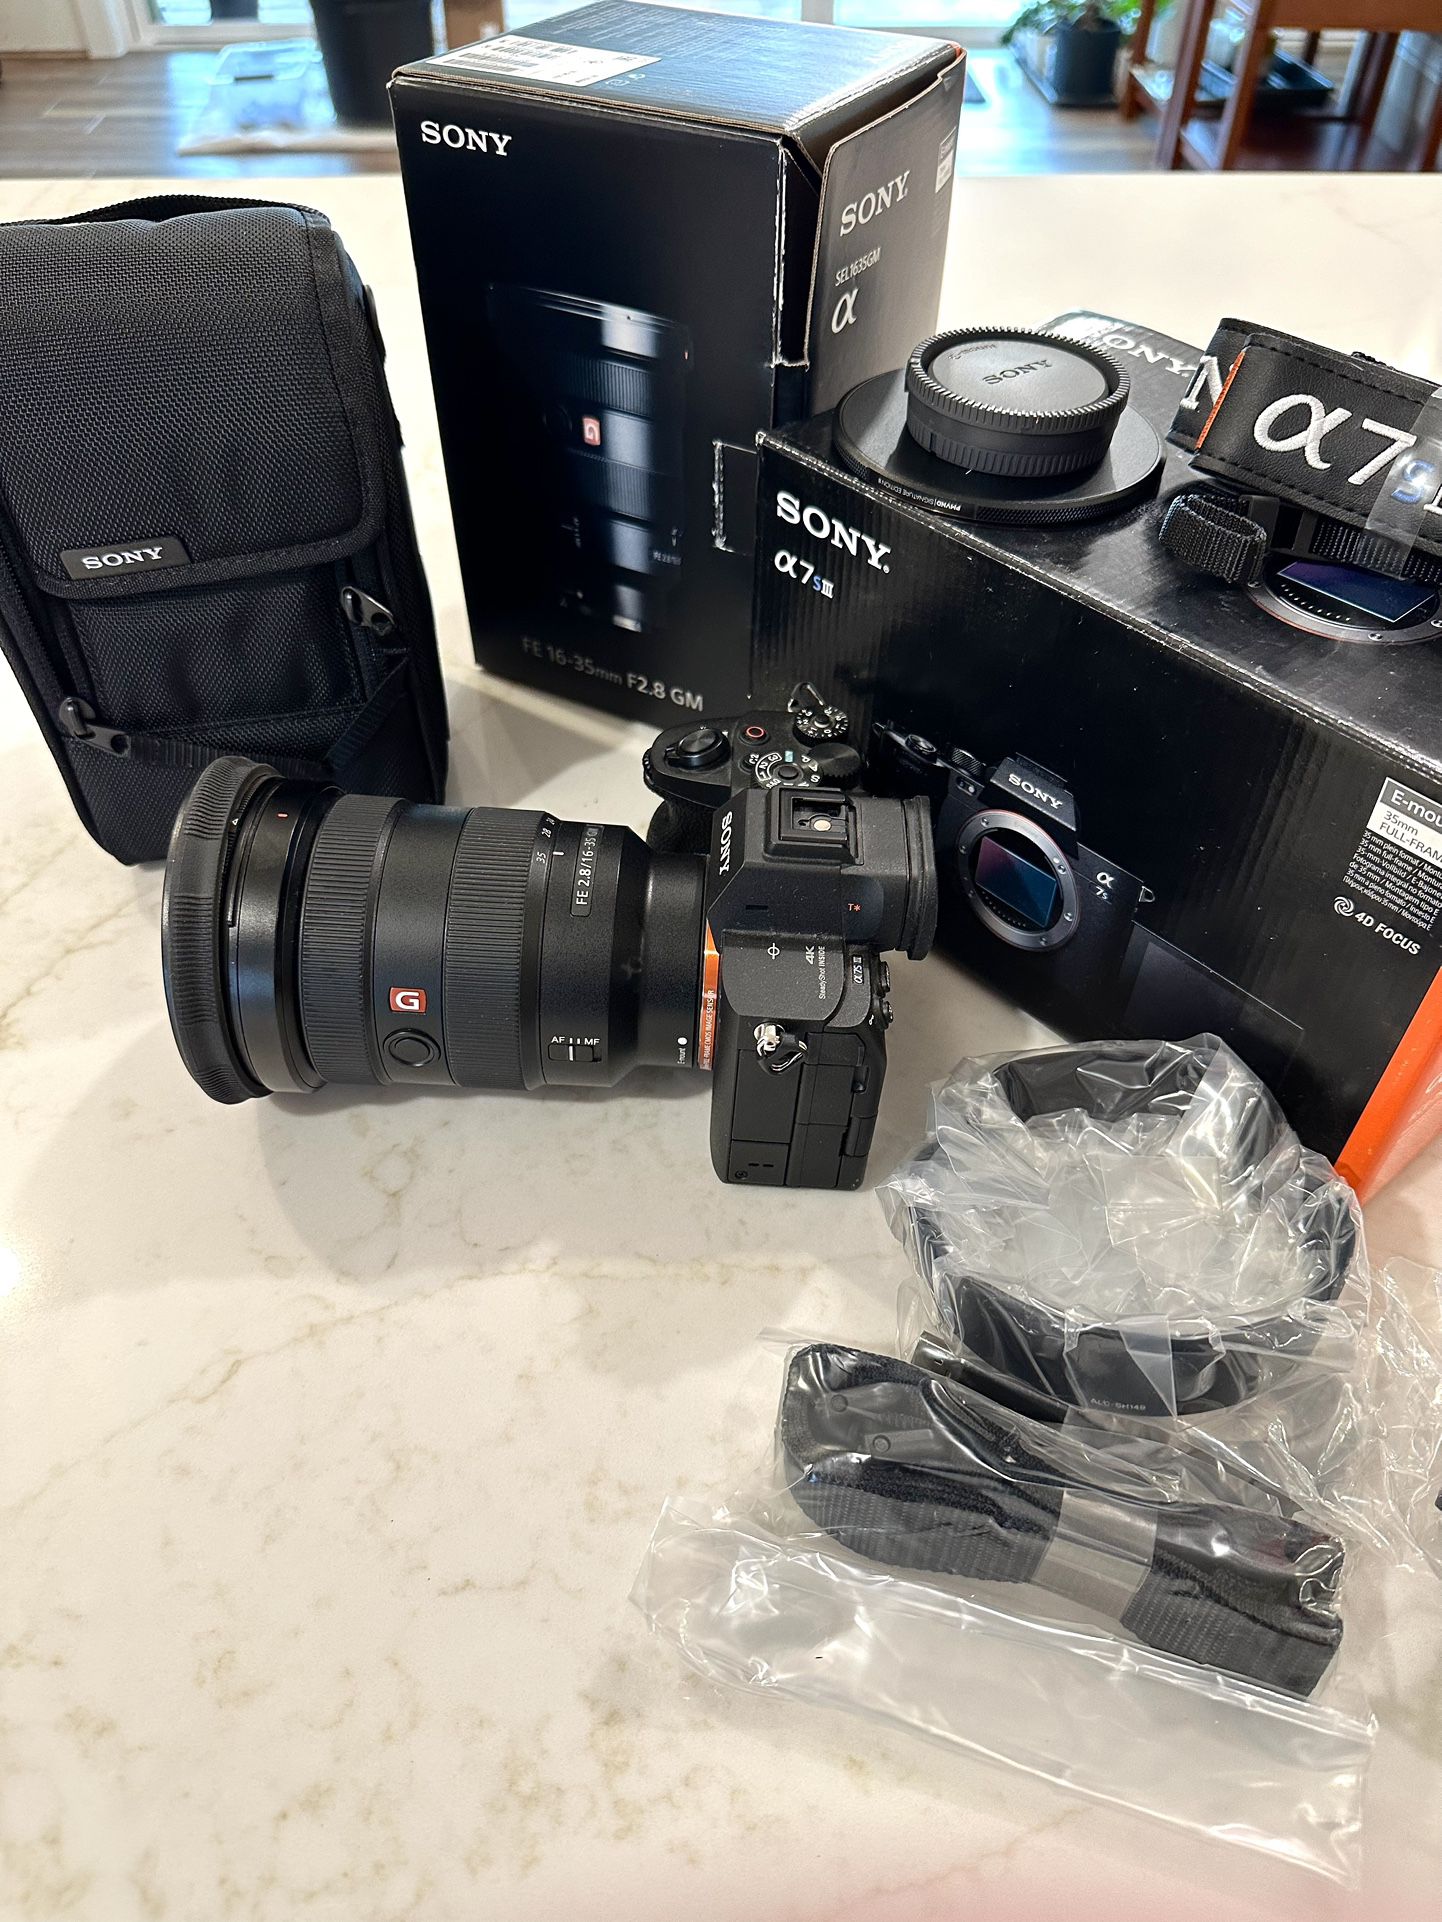 Sony A7S iii mirrorless camera and Sony G-Master FE 16-35mm f/2.8 GM Lens Bundle